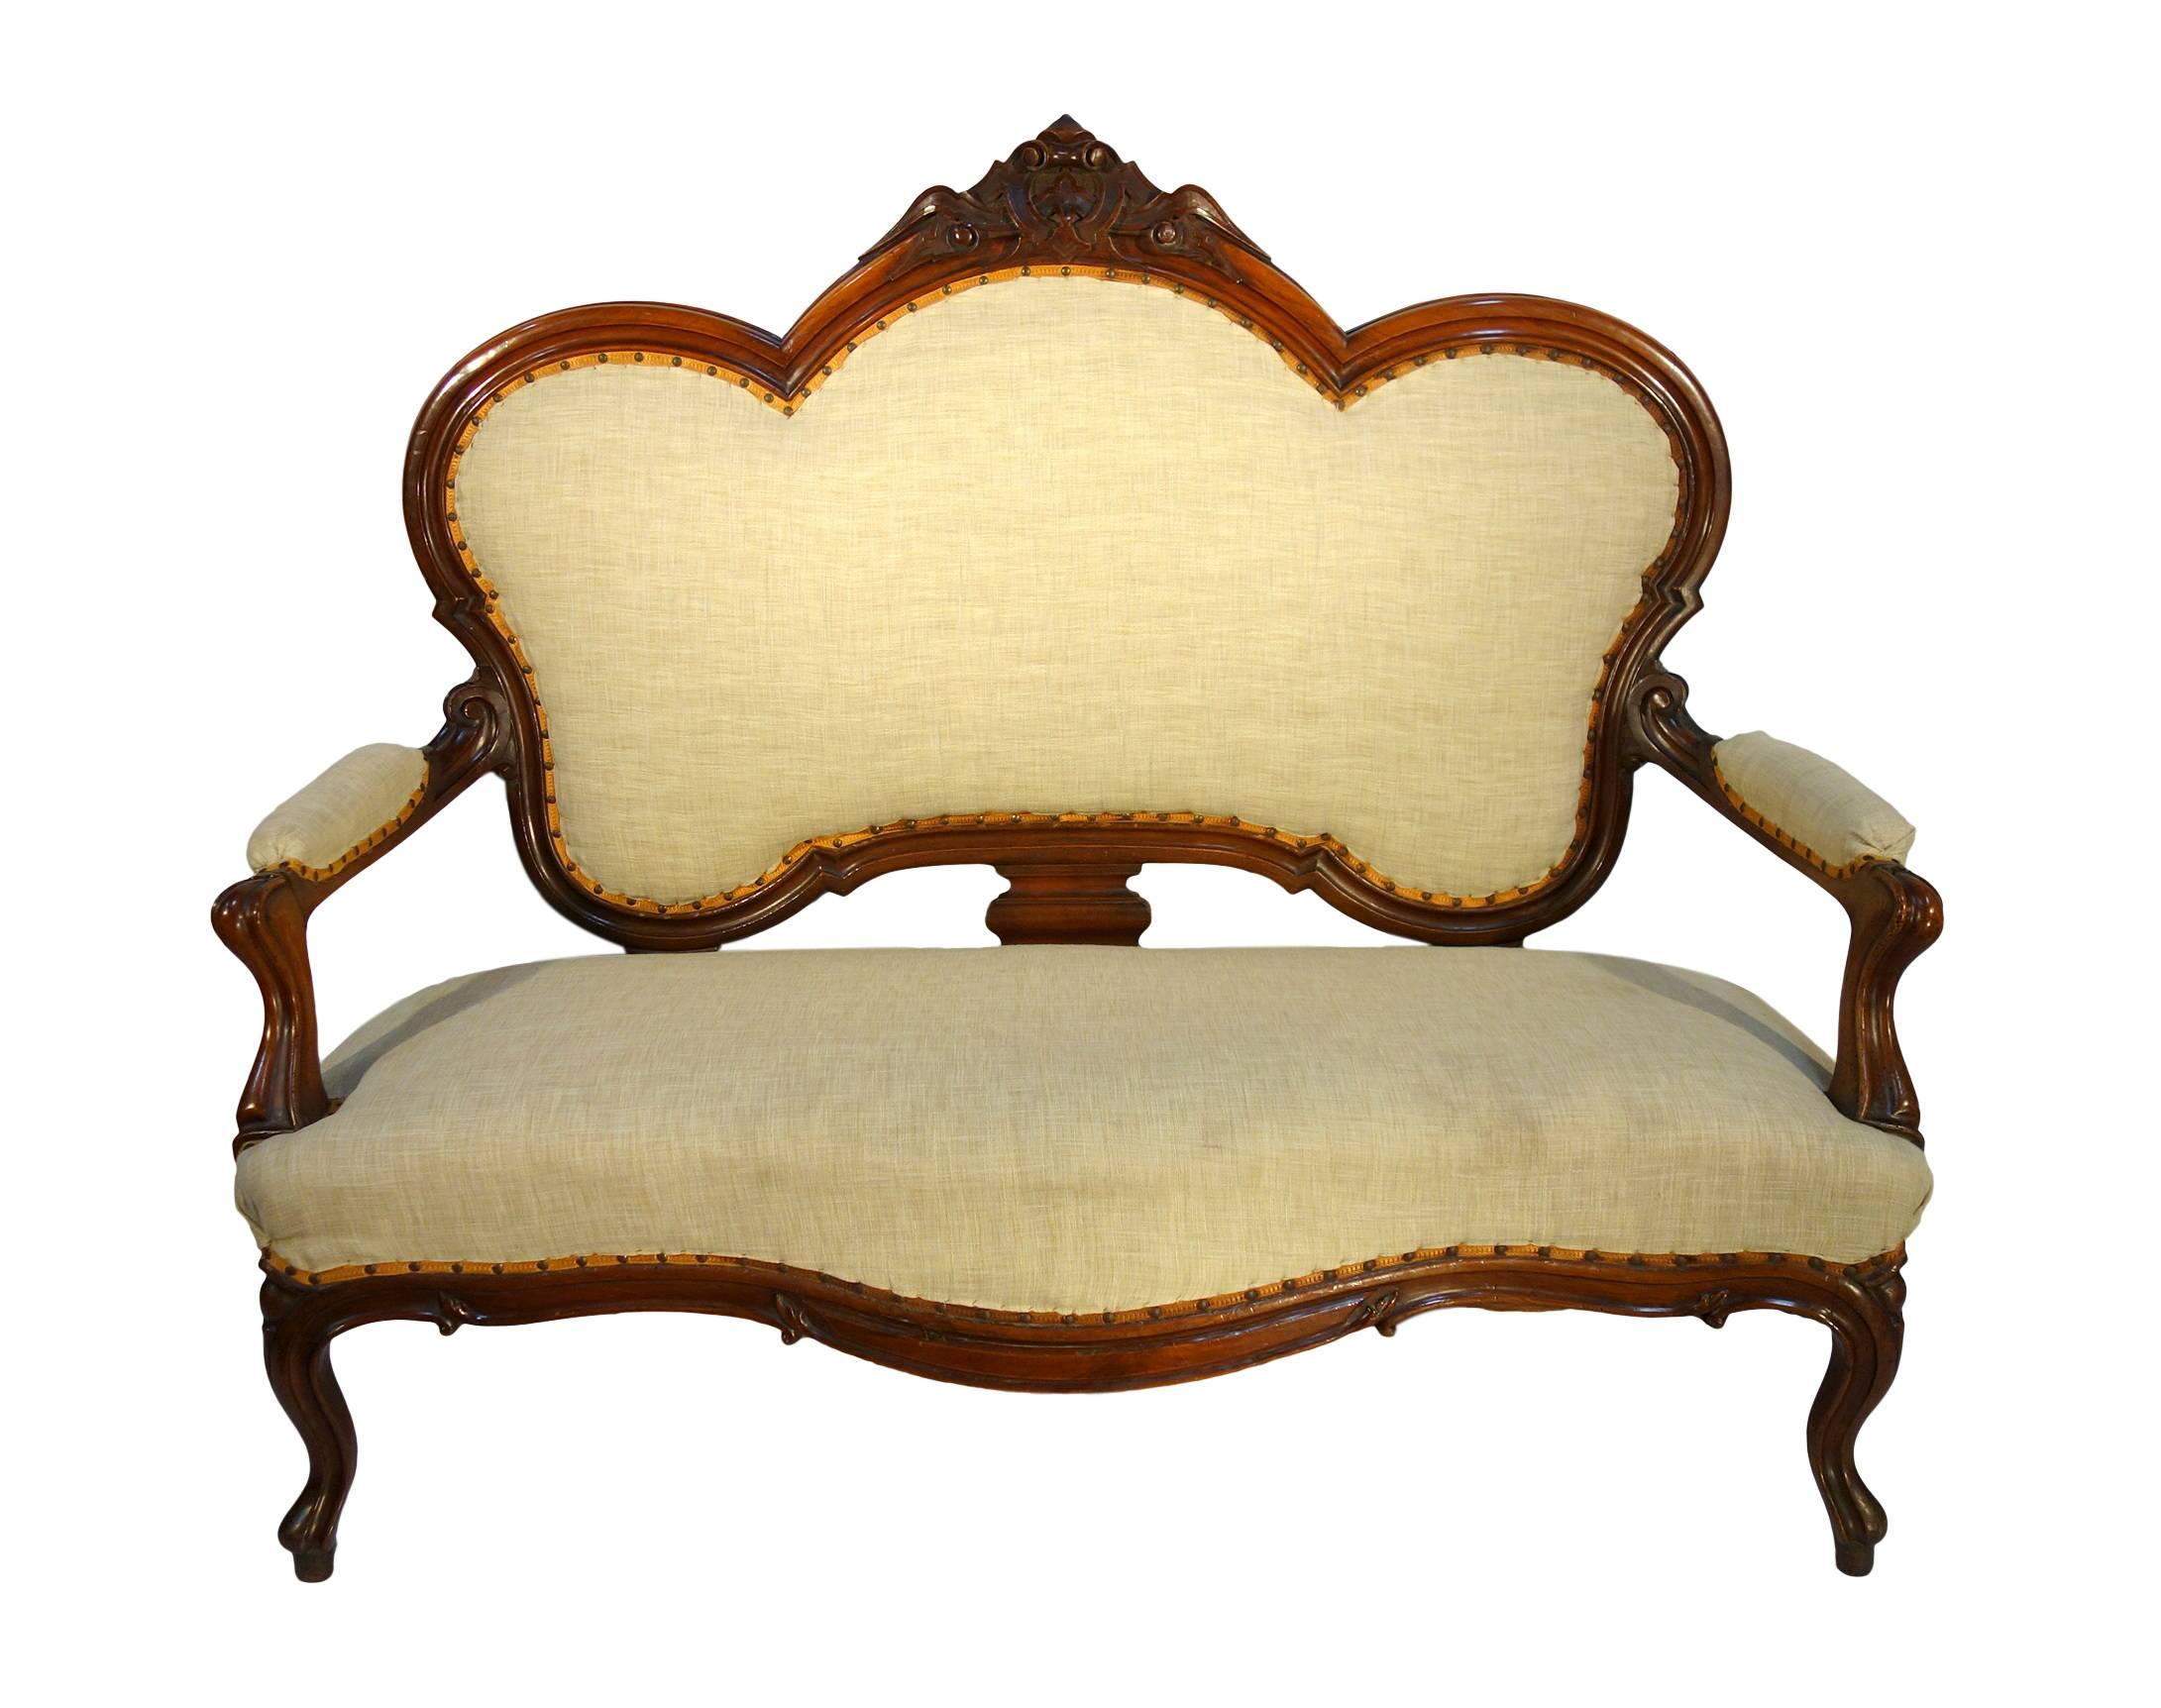 Shapely 19th Century sofa settee, solid walnut, carved coping. Piedmont, Circa 1860.  Reupholstered.

Measures: 63